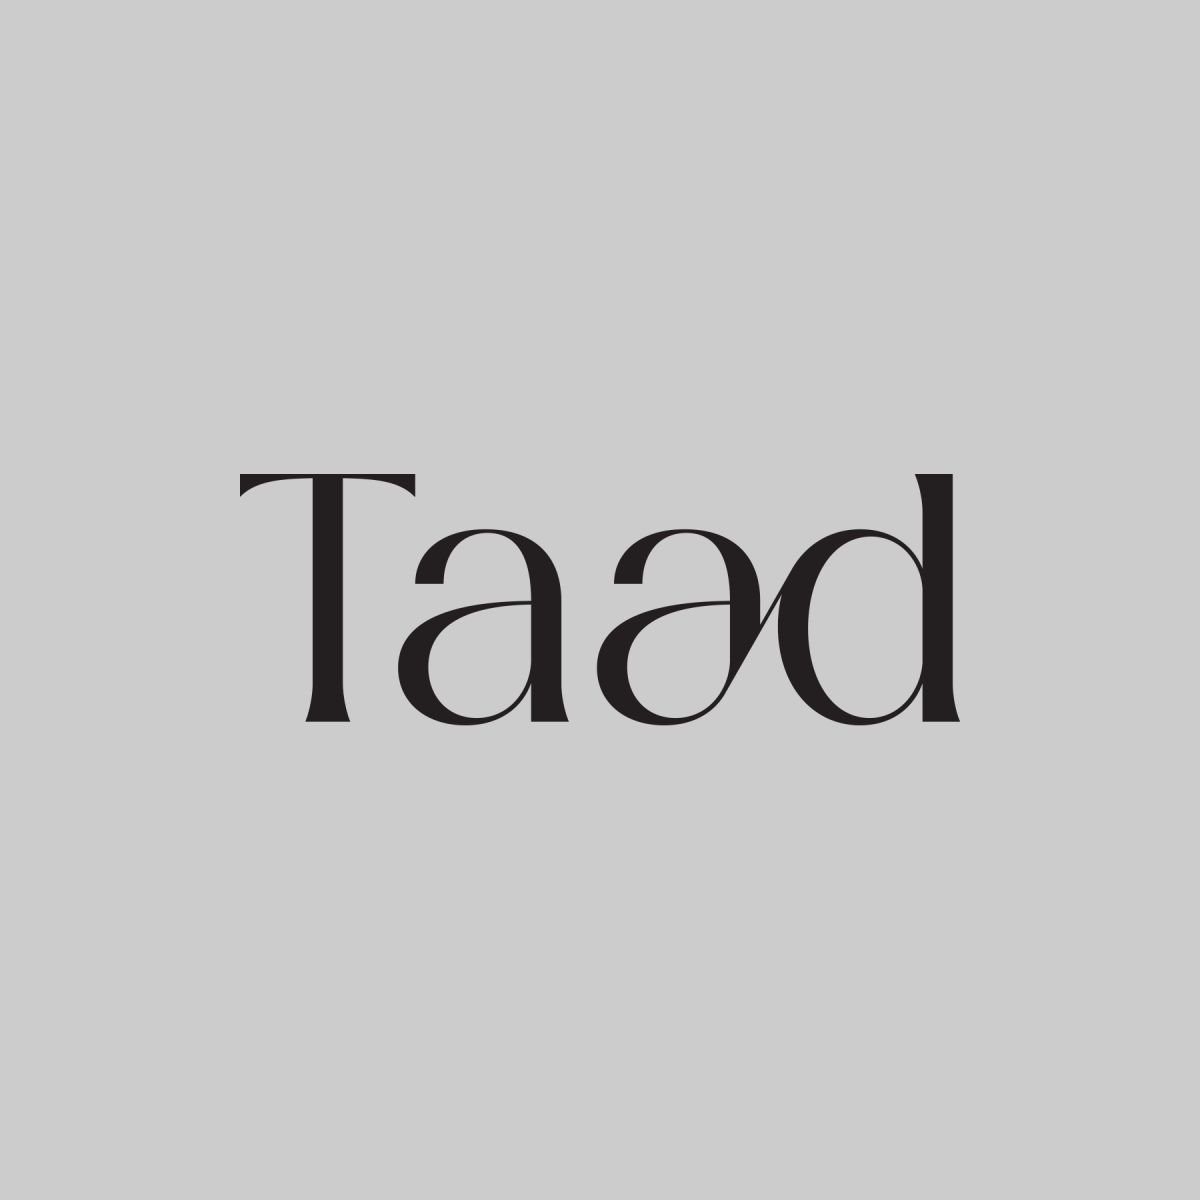 Taad (Delivery) brand thumbnail image